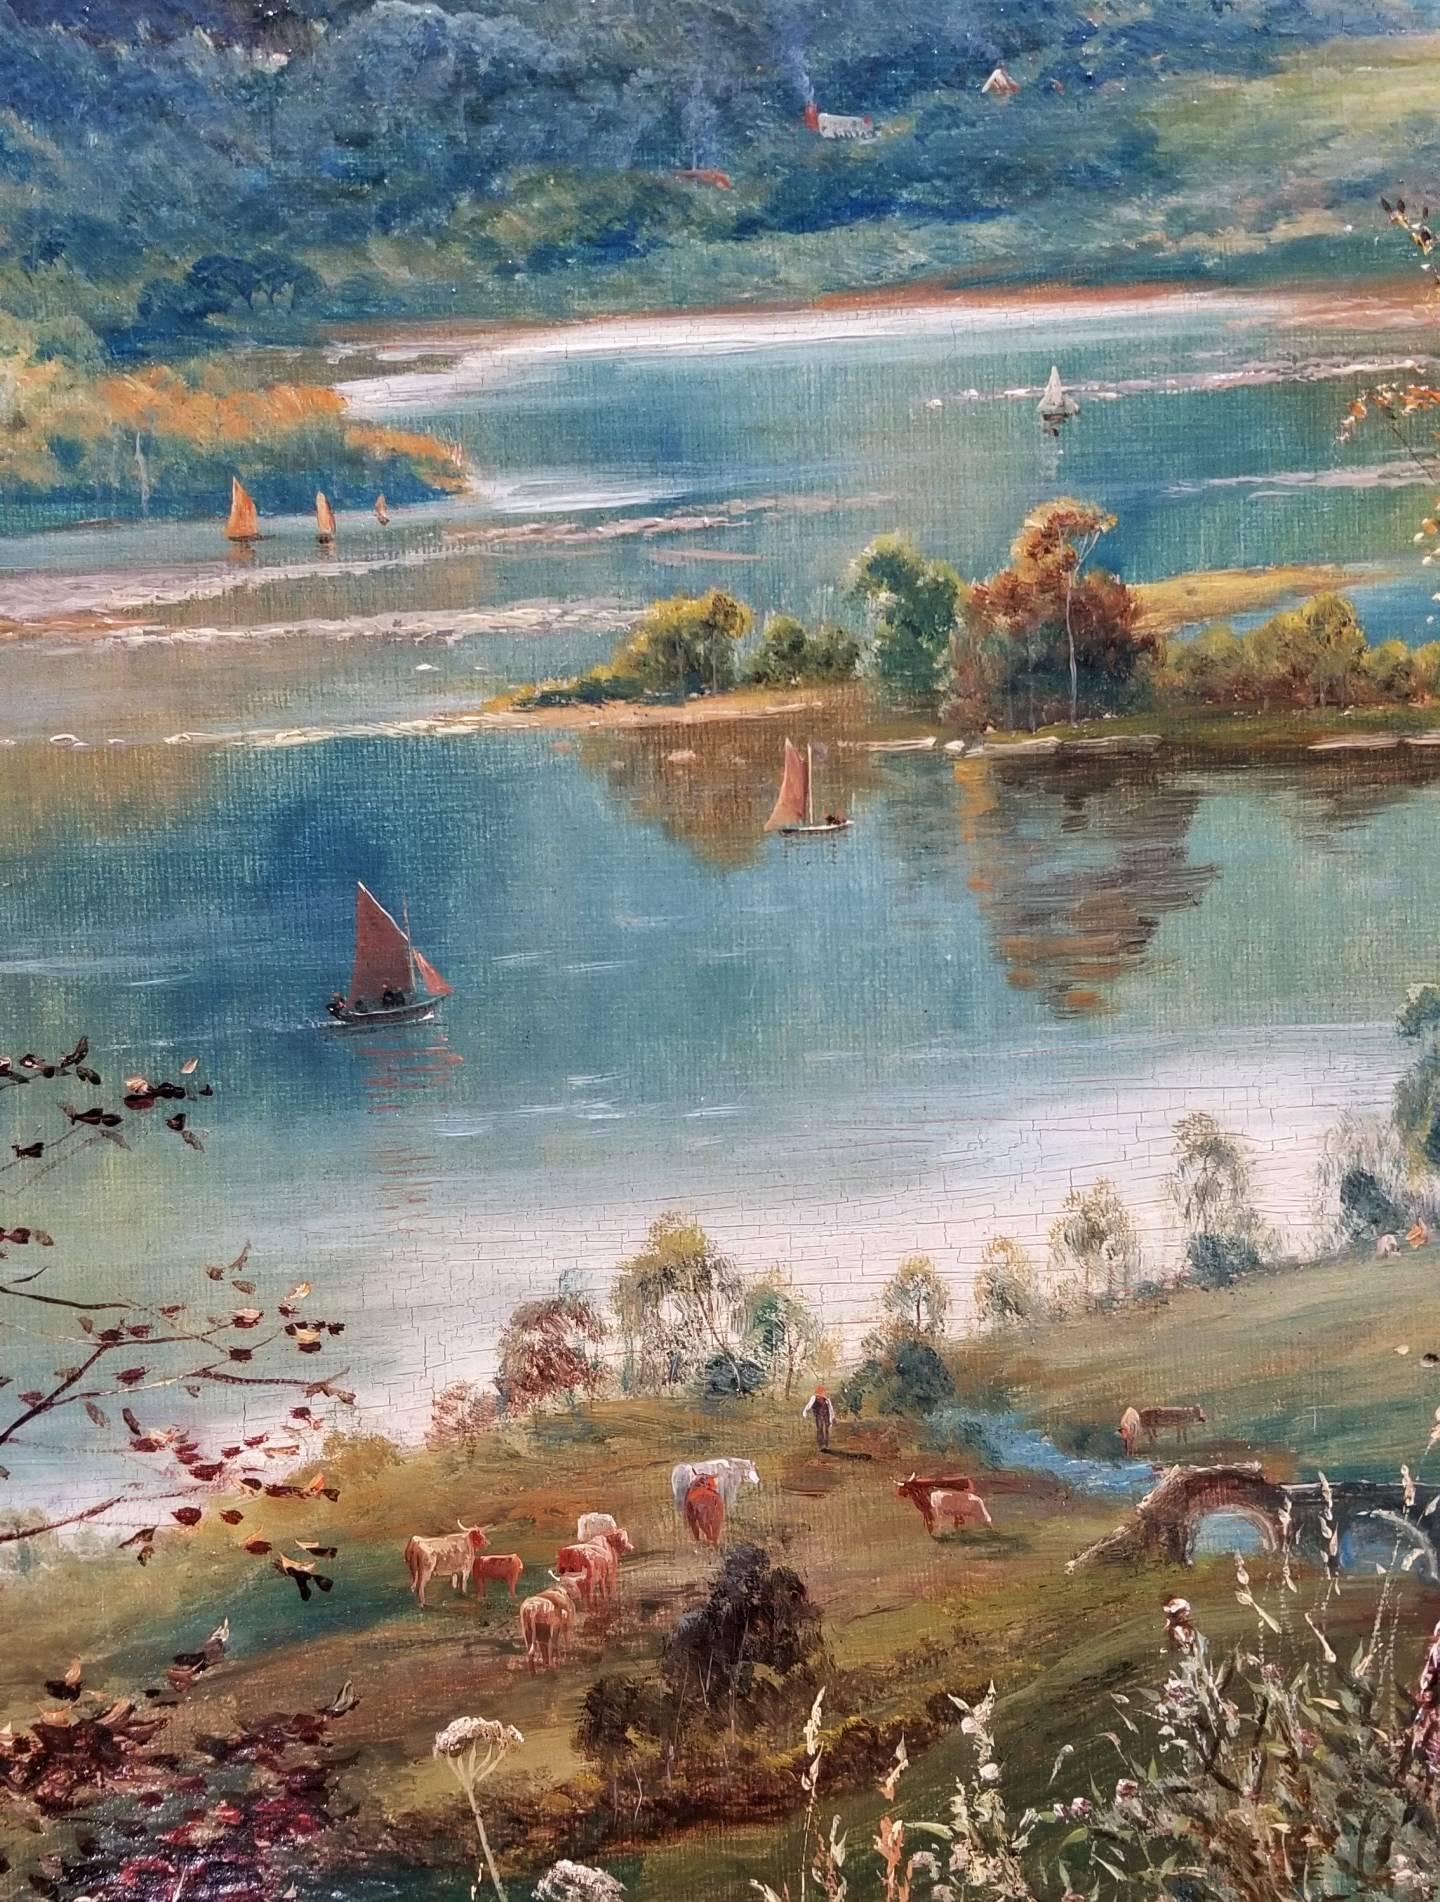 An original signed oil on canvas painting by British artist Theodore Hines (Active: 1876-1889) titled "Loch Katrine, Scotland", c. 1880. Hand signed by Hines lower left. There is a lot of exquisite detail of cows, people and ships all